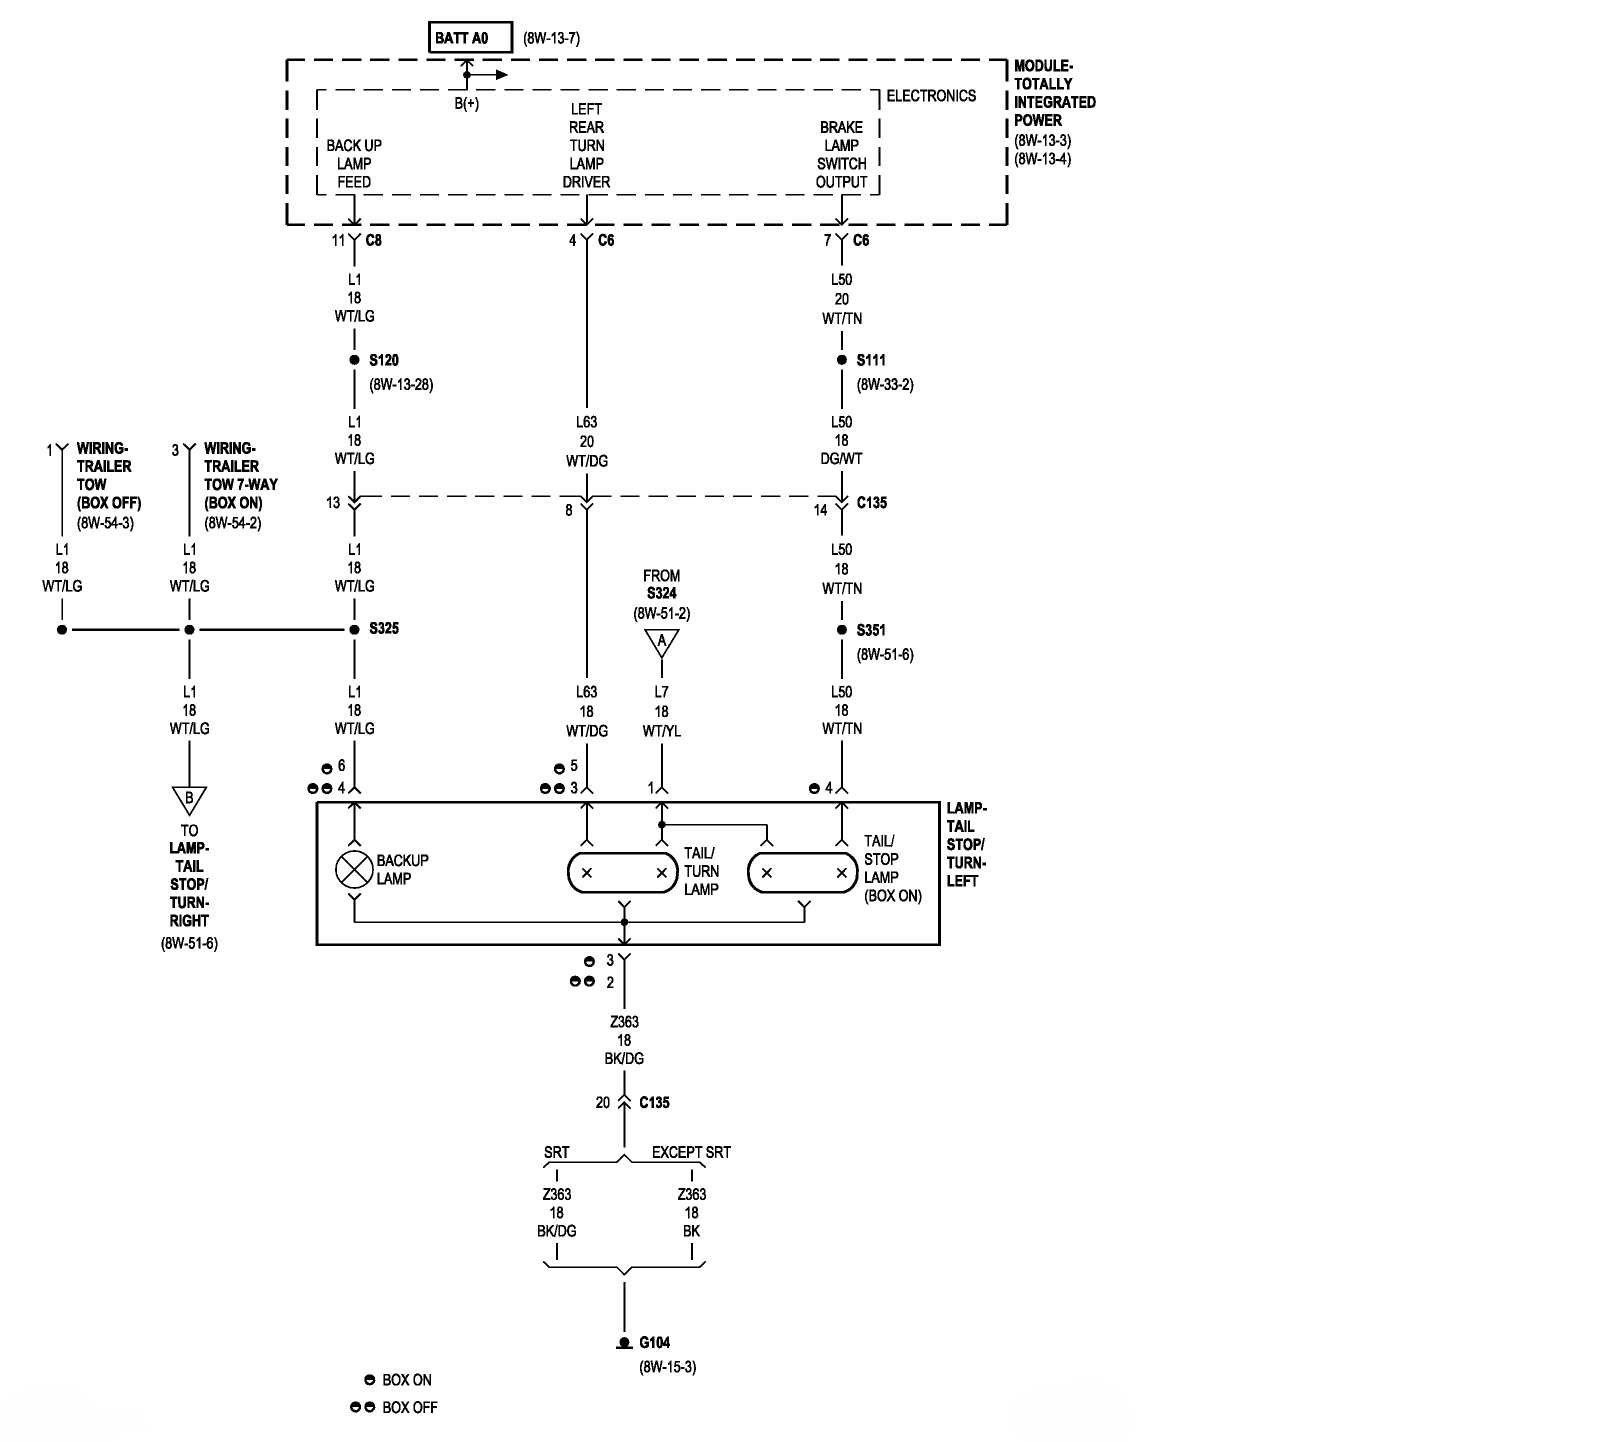 I Have A 2006 Dodge Ram 1500 V6 All Of My Break Lights Are Out  - 2006 Dodge RAM 1500 Turn Signal Wiring Diagram